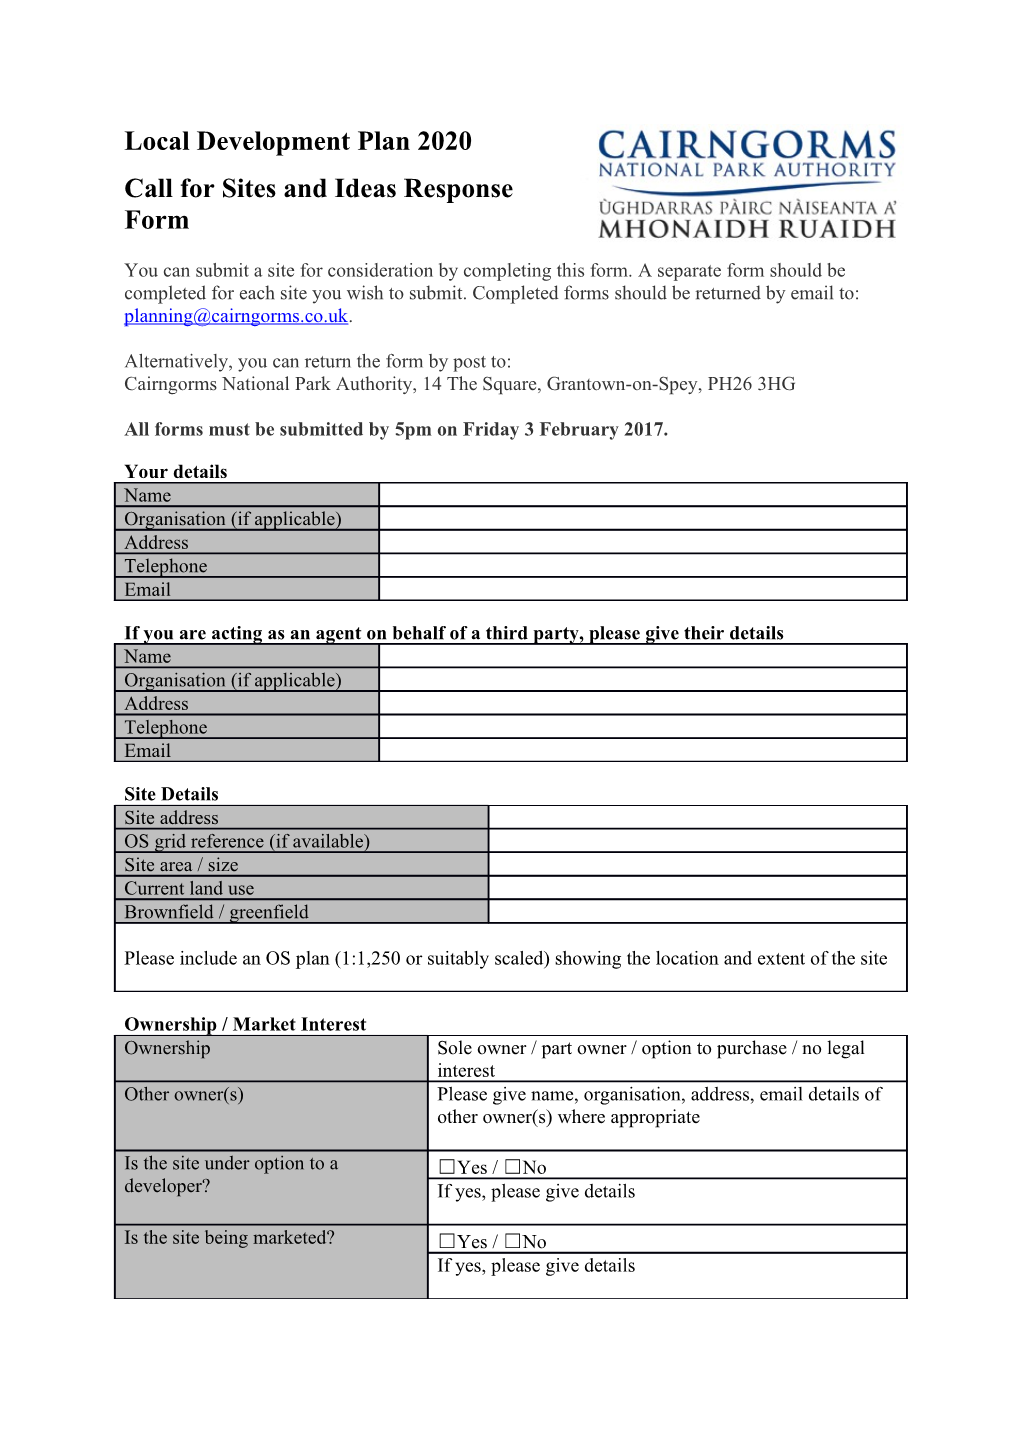 Call for Sitesand Ideas Response Form